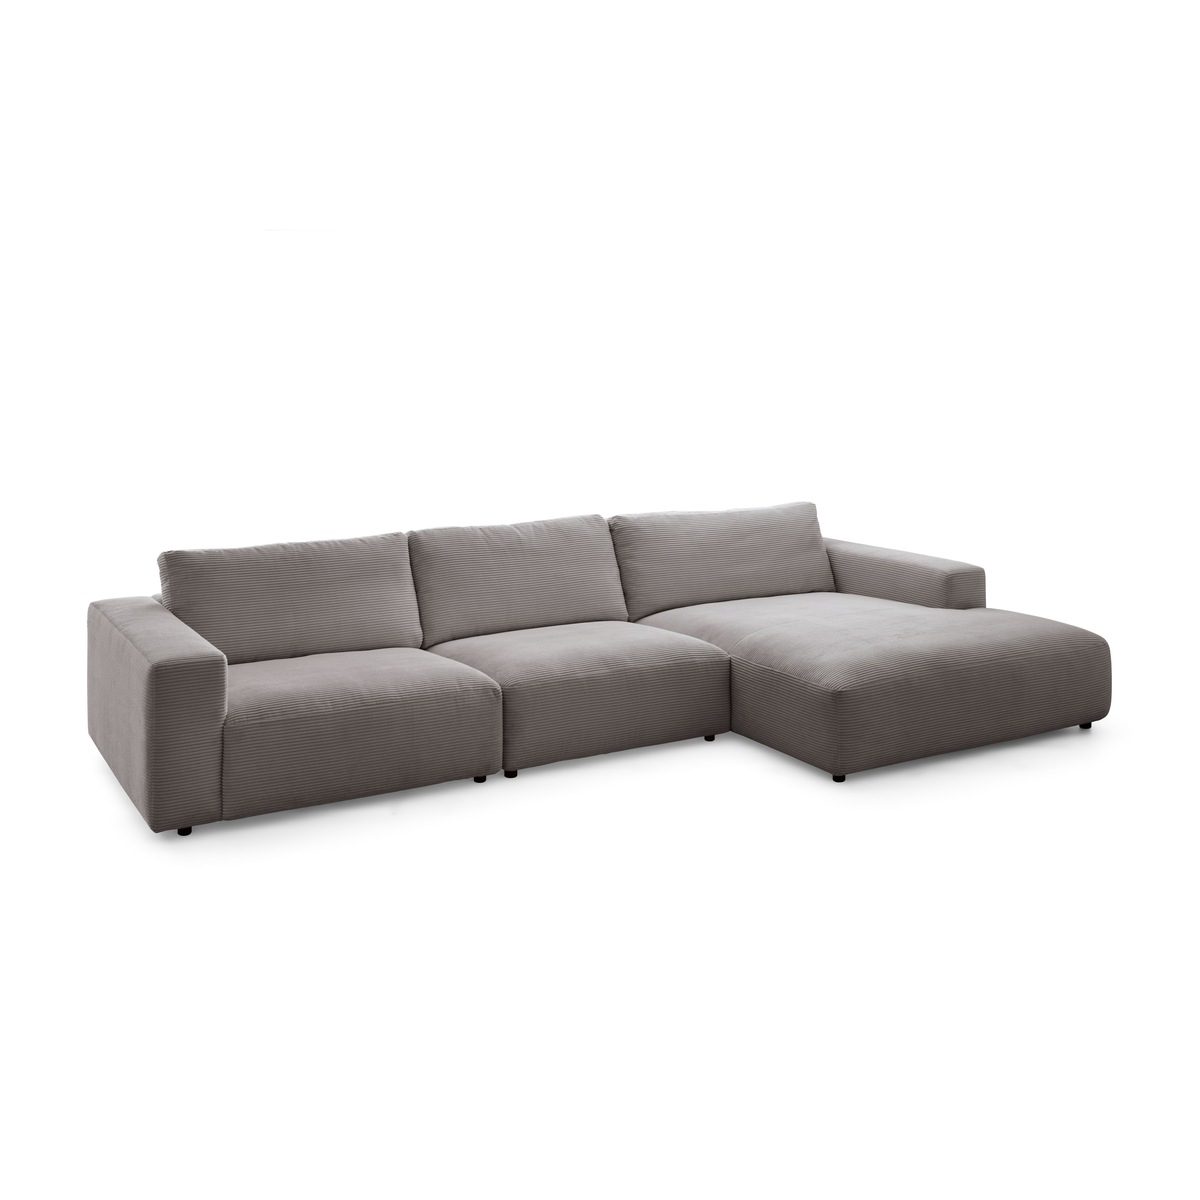 Gallery M branded Lucia Sitzer 3,5 Sofa by Musterring Cord